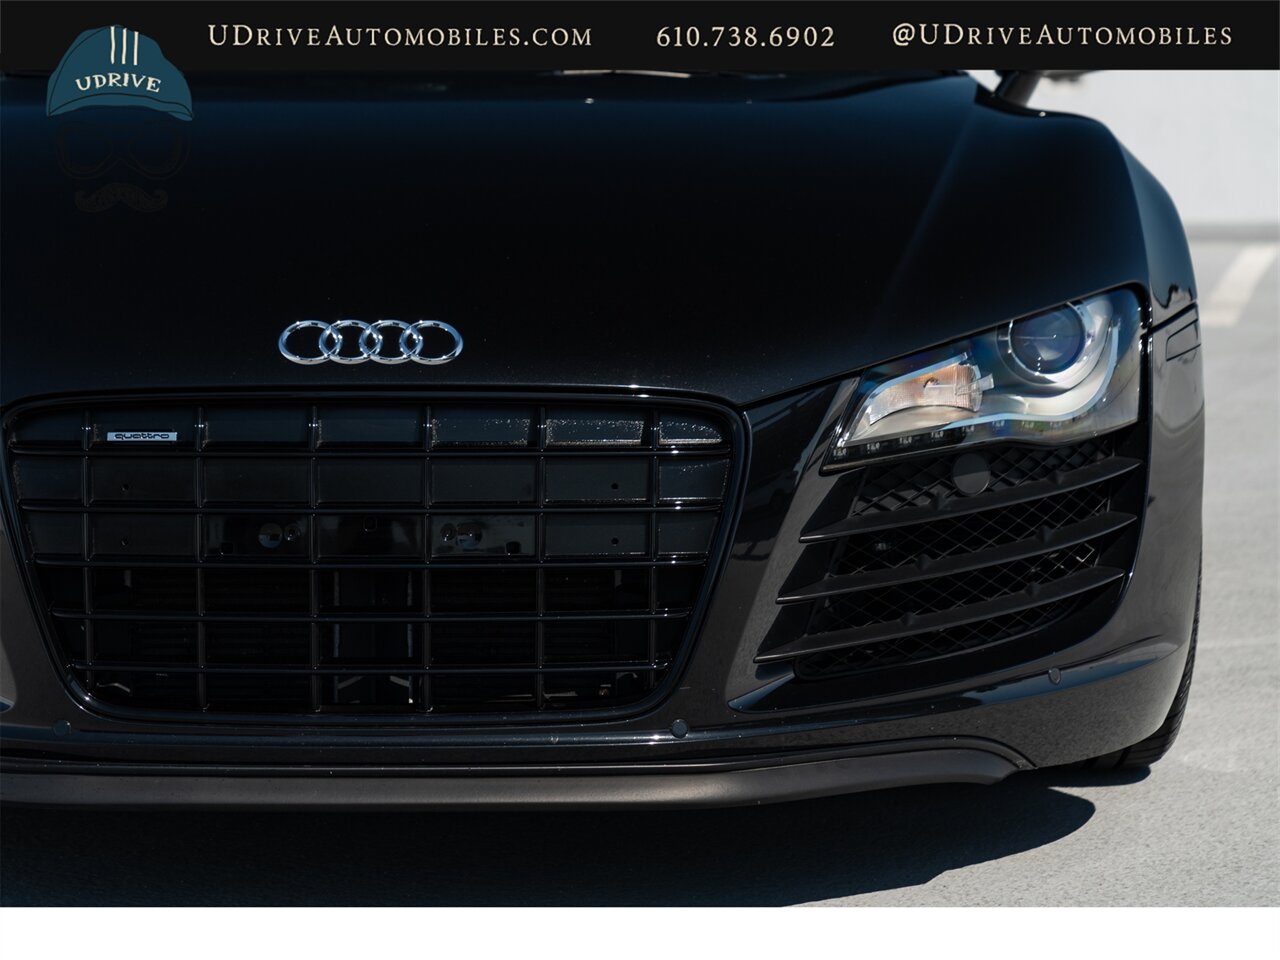 2009 Audi R8 Quattro  4.2L V8 6 Speed Manual - Photo 12 - West Chester, PA 19382